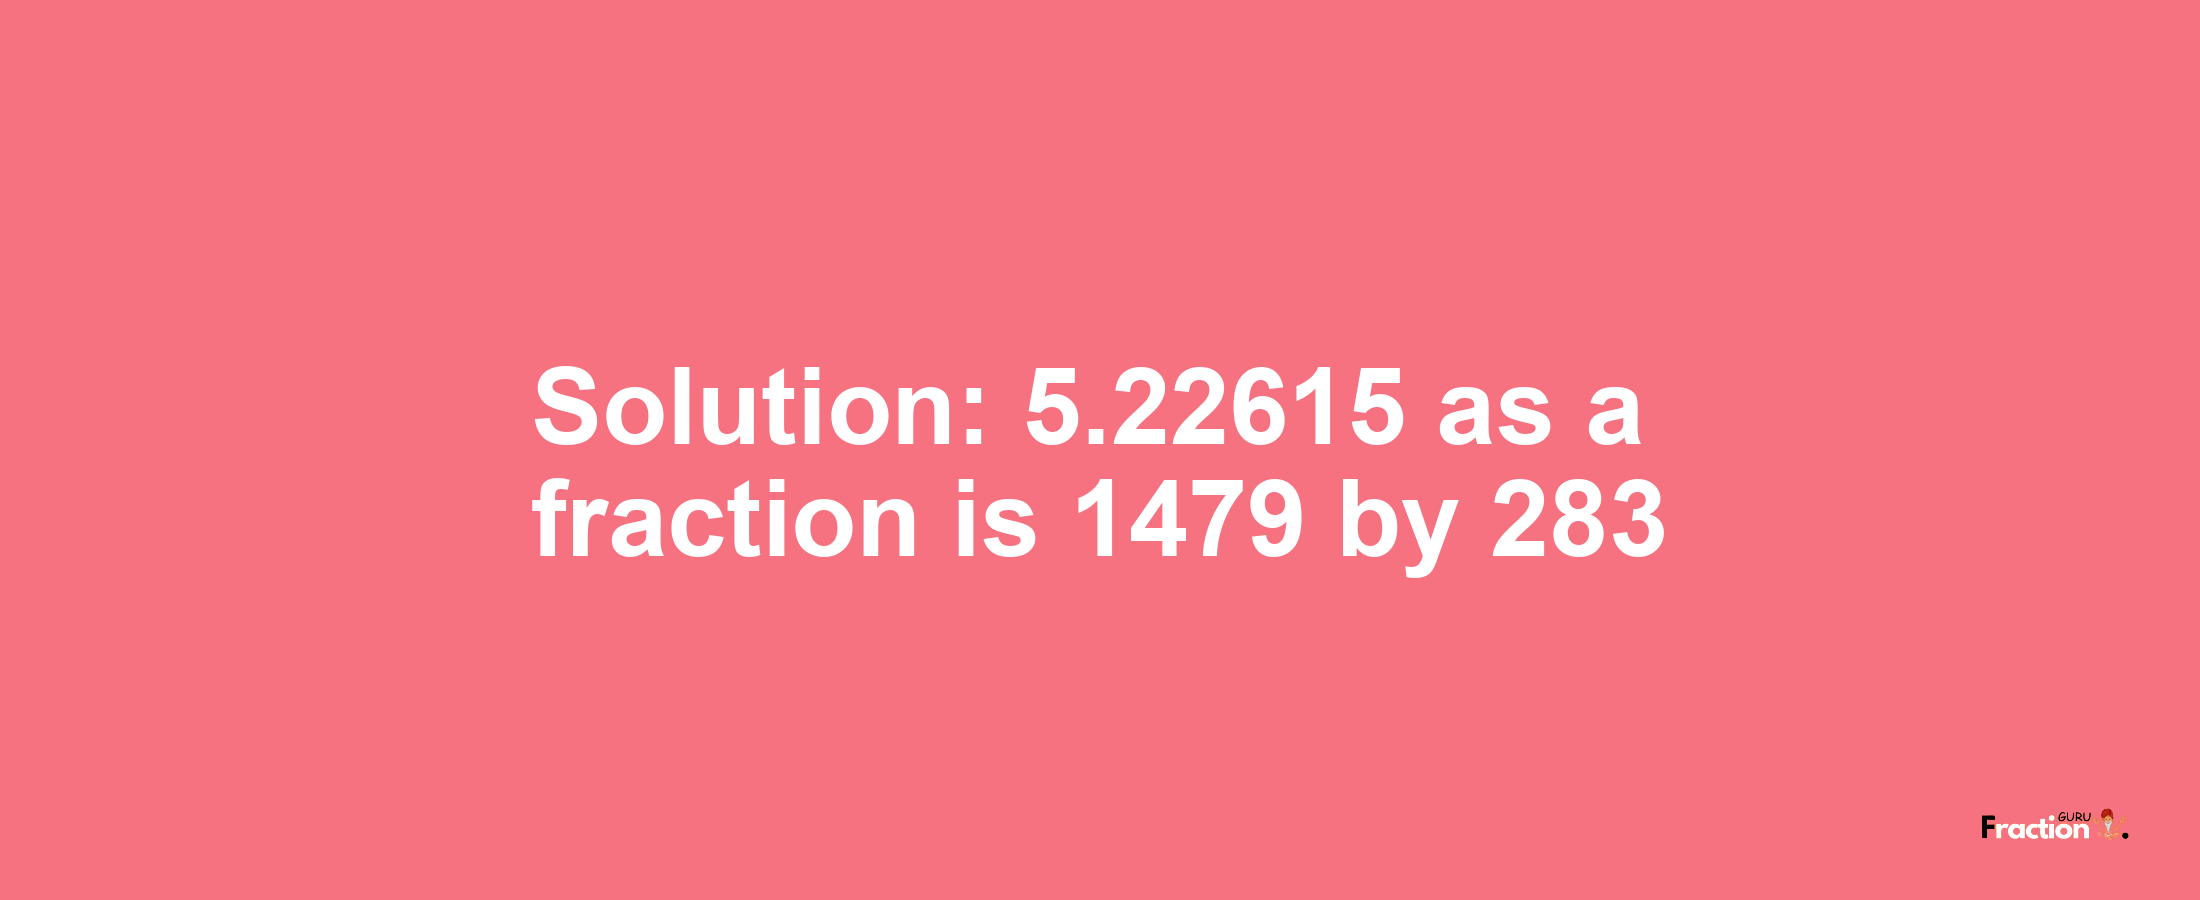 Solution:5.22615 as a fraction is 1479/283